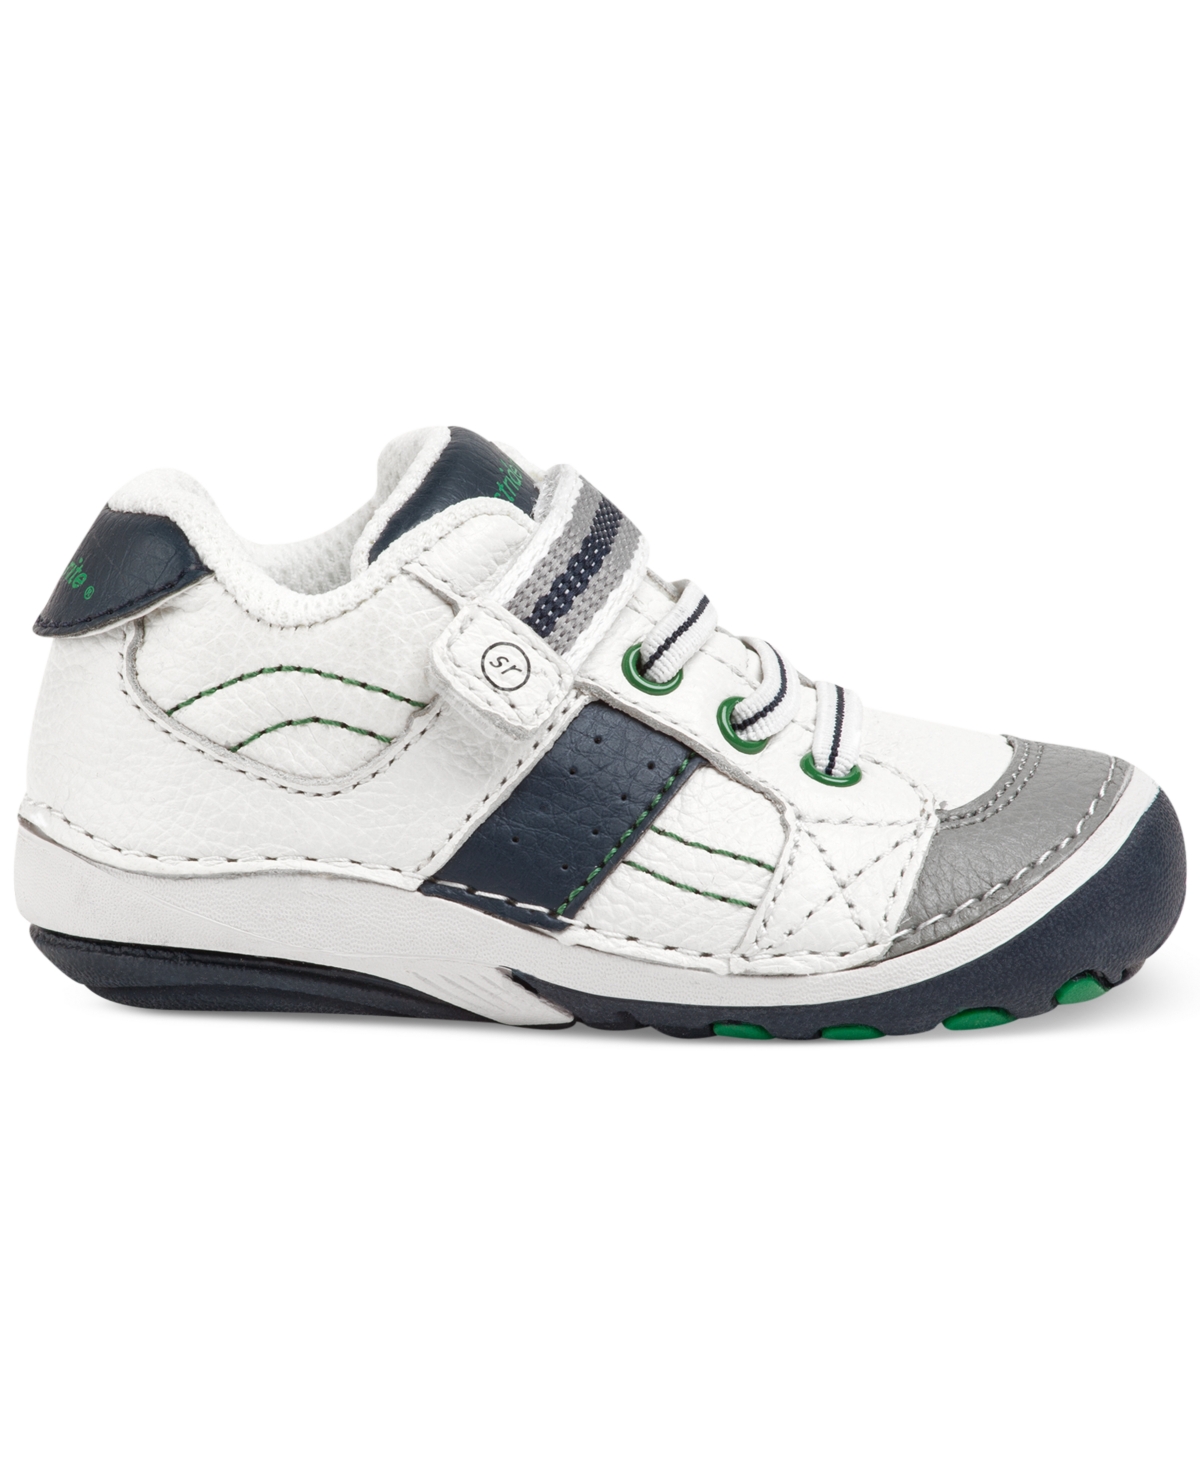 Shop Stride Rite Toddler Boys Srt Sm Artie Athletic Shoes In White,navy